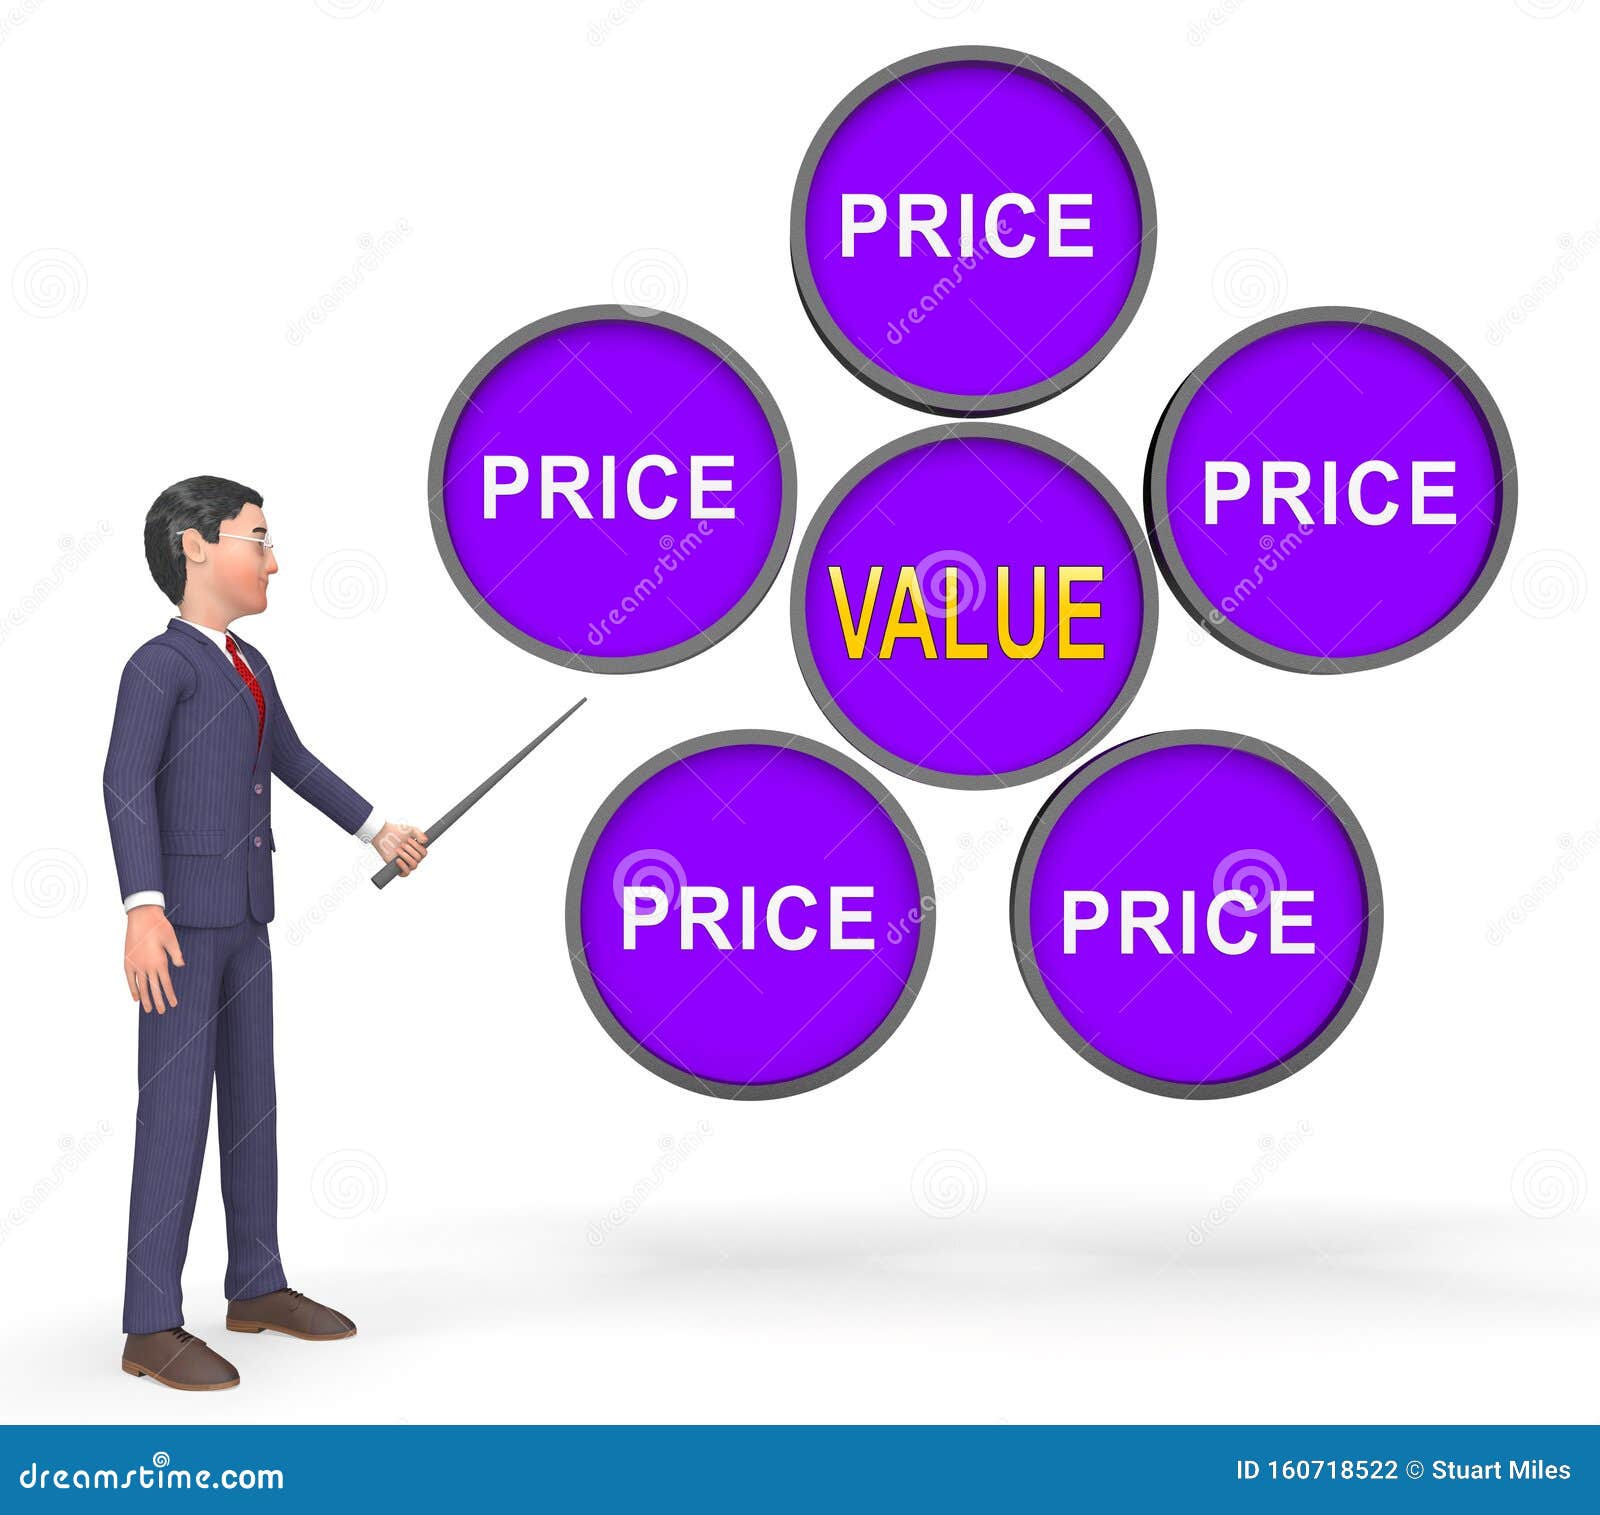 price vs value signs comparing cost outlay against financial worth - 3d 